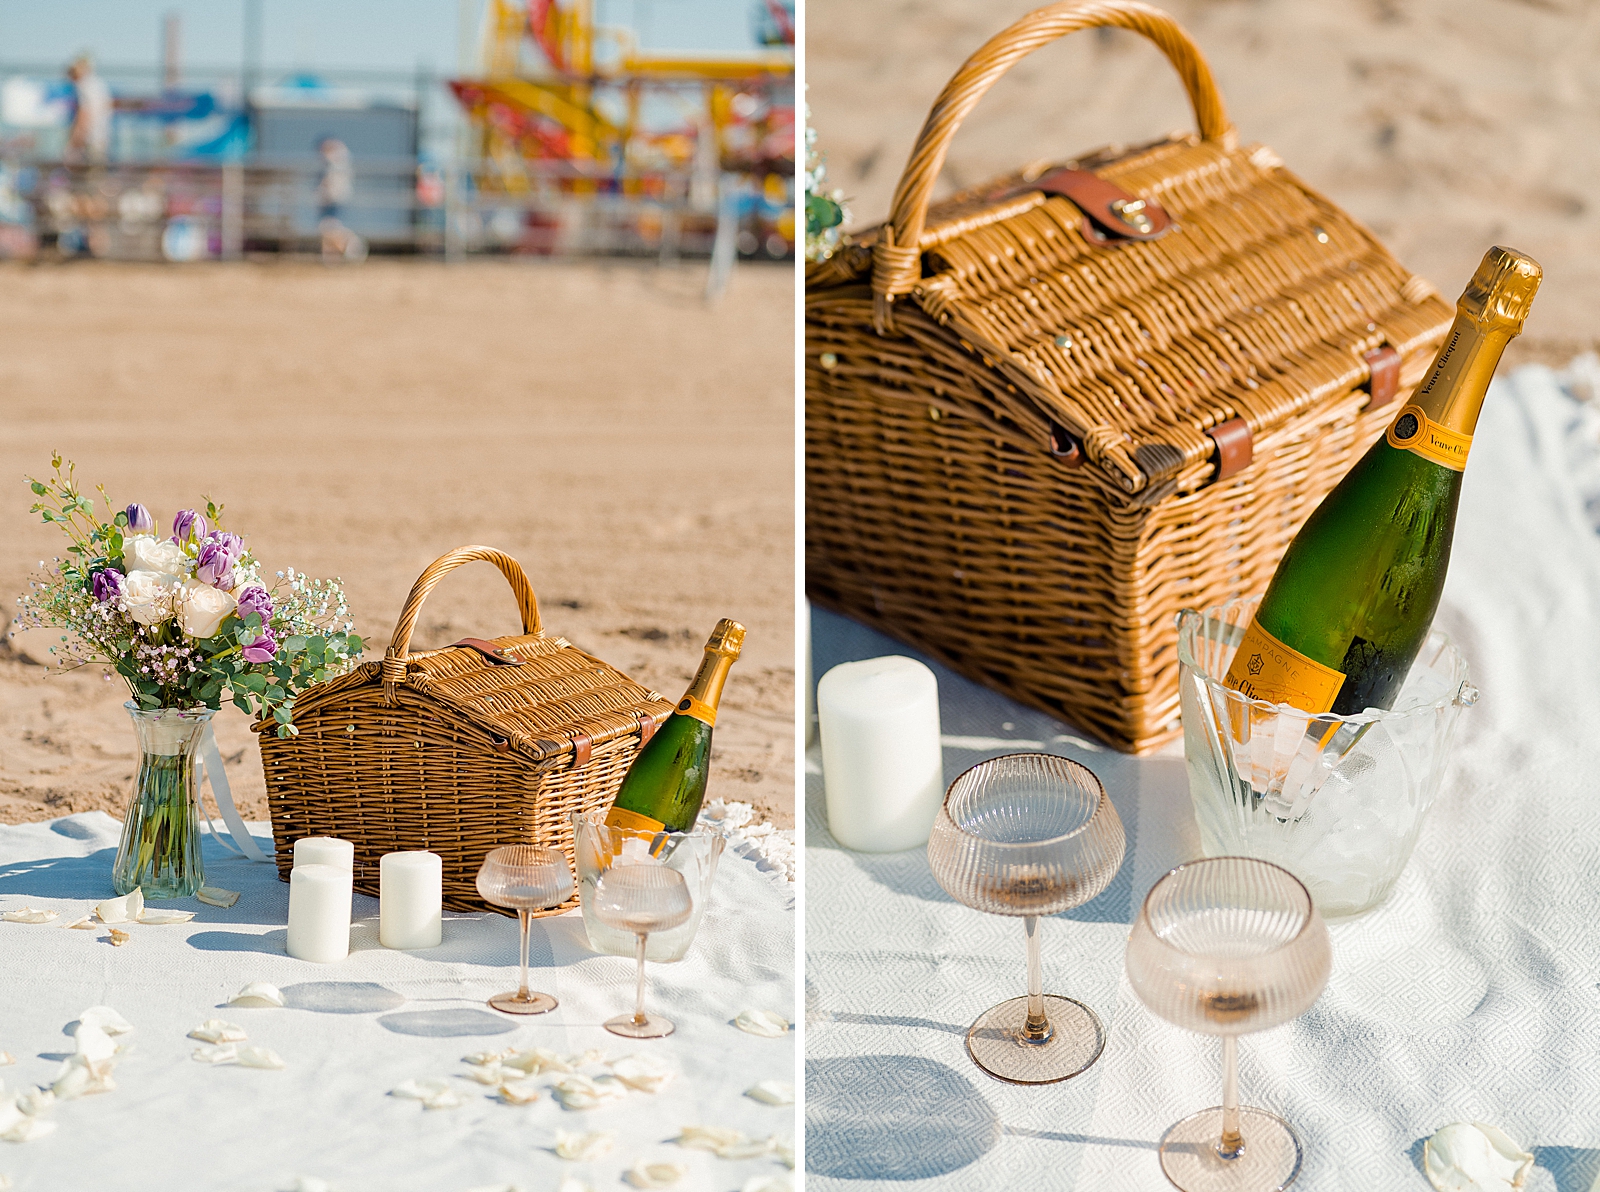 beach picnic proposal set up with picnic basket, veuve clicquot champagne. glasses, and candles